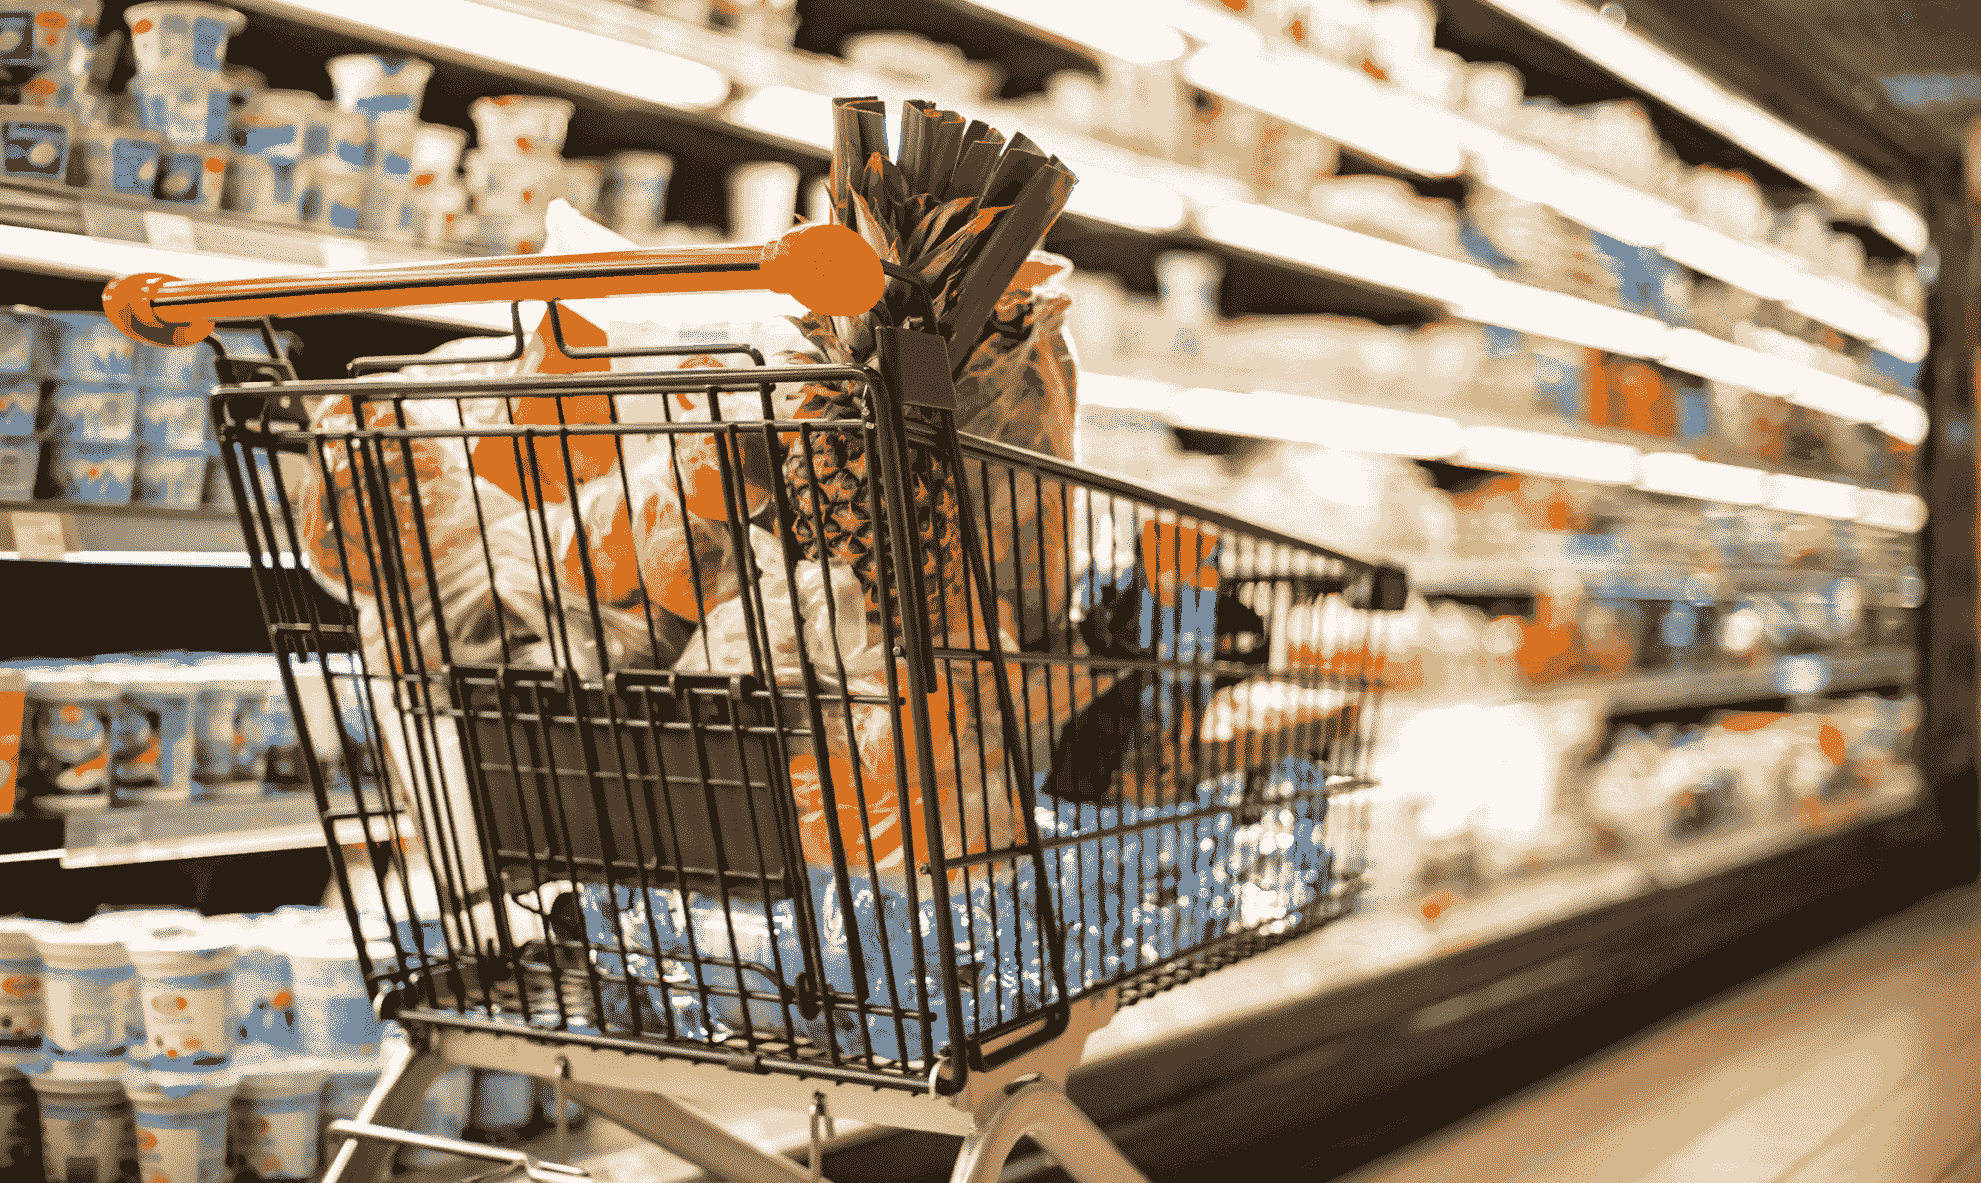 A supermarket trolley filled with food and left in an aisle-min